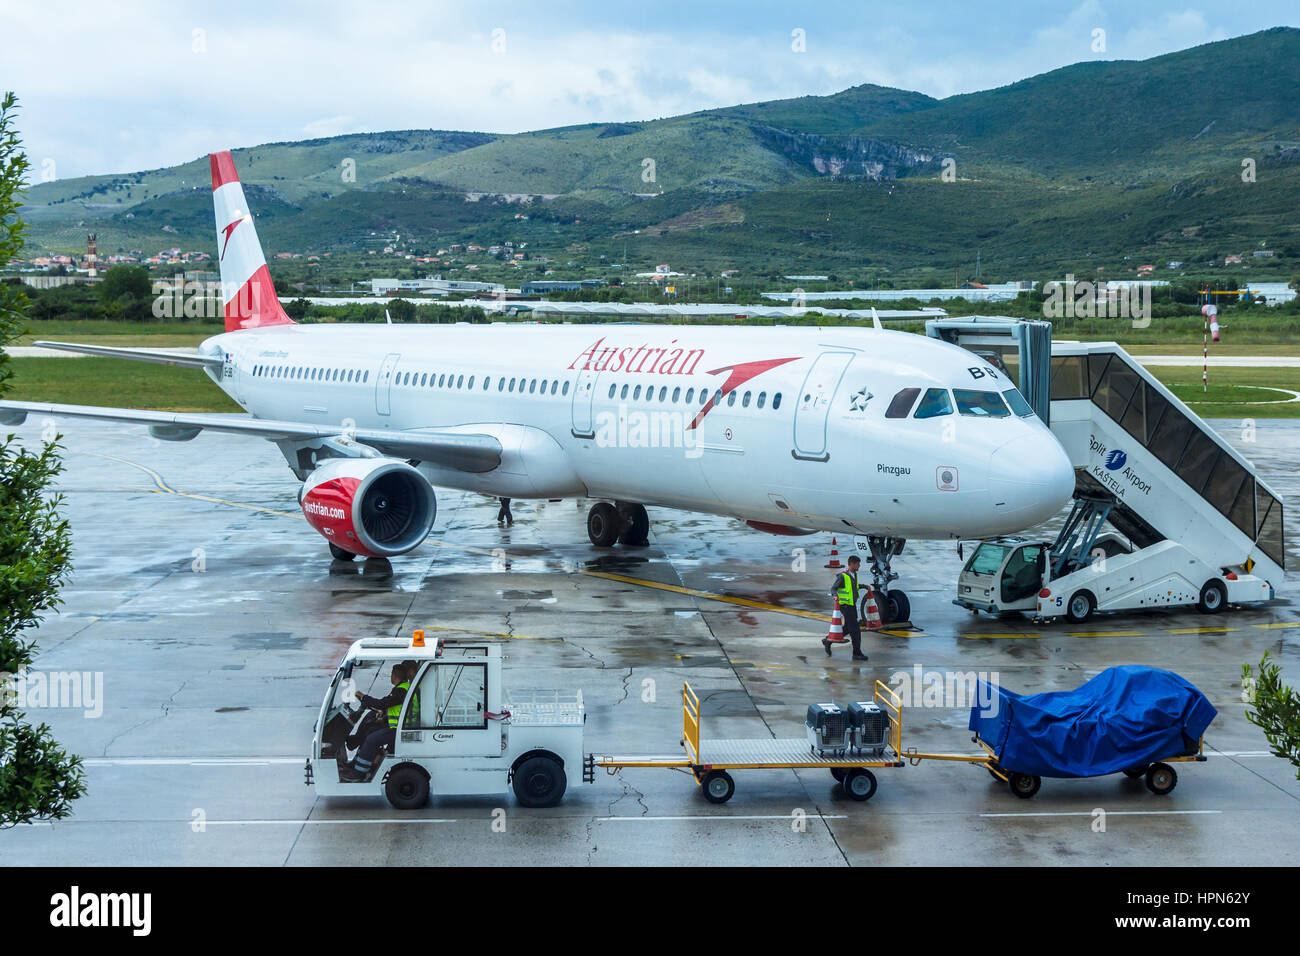 Split Airport, Croatia - May 12, 2016: Austrian airlines Airbus on the tarmac Stock Photo